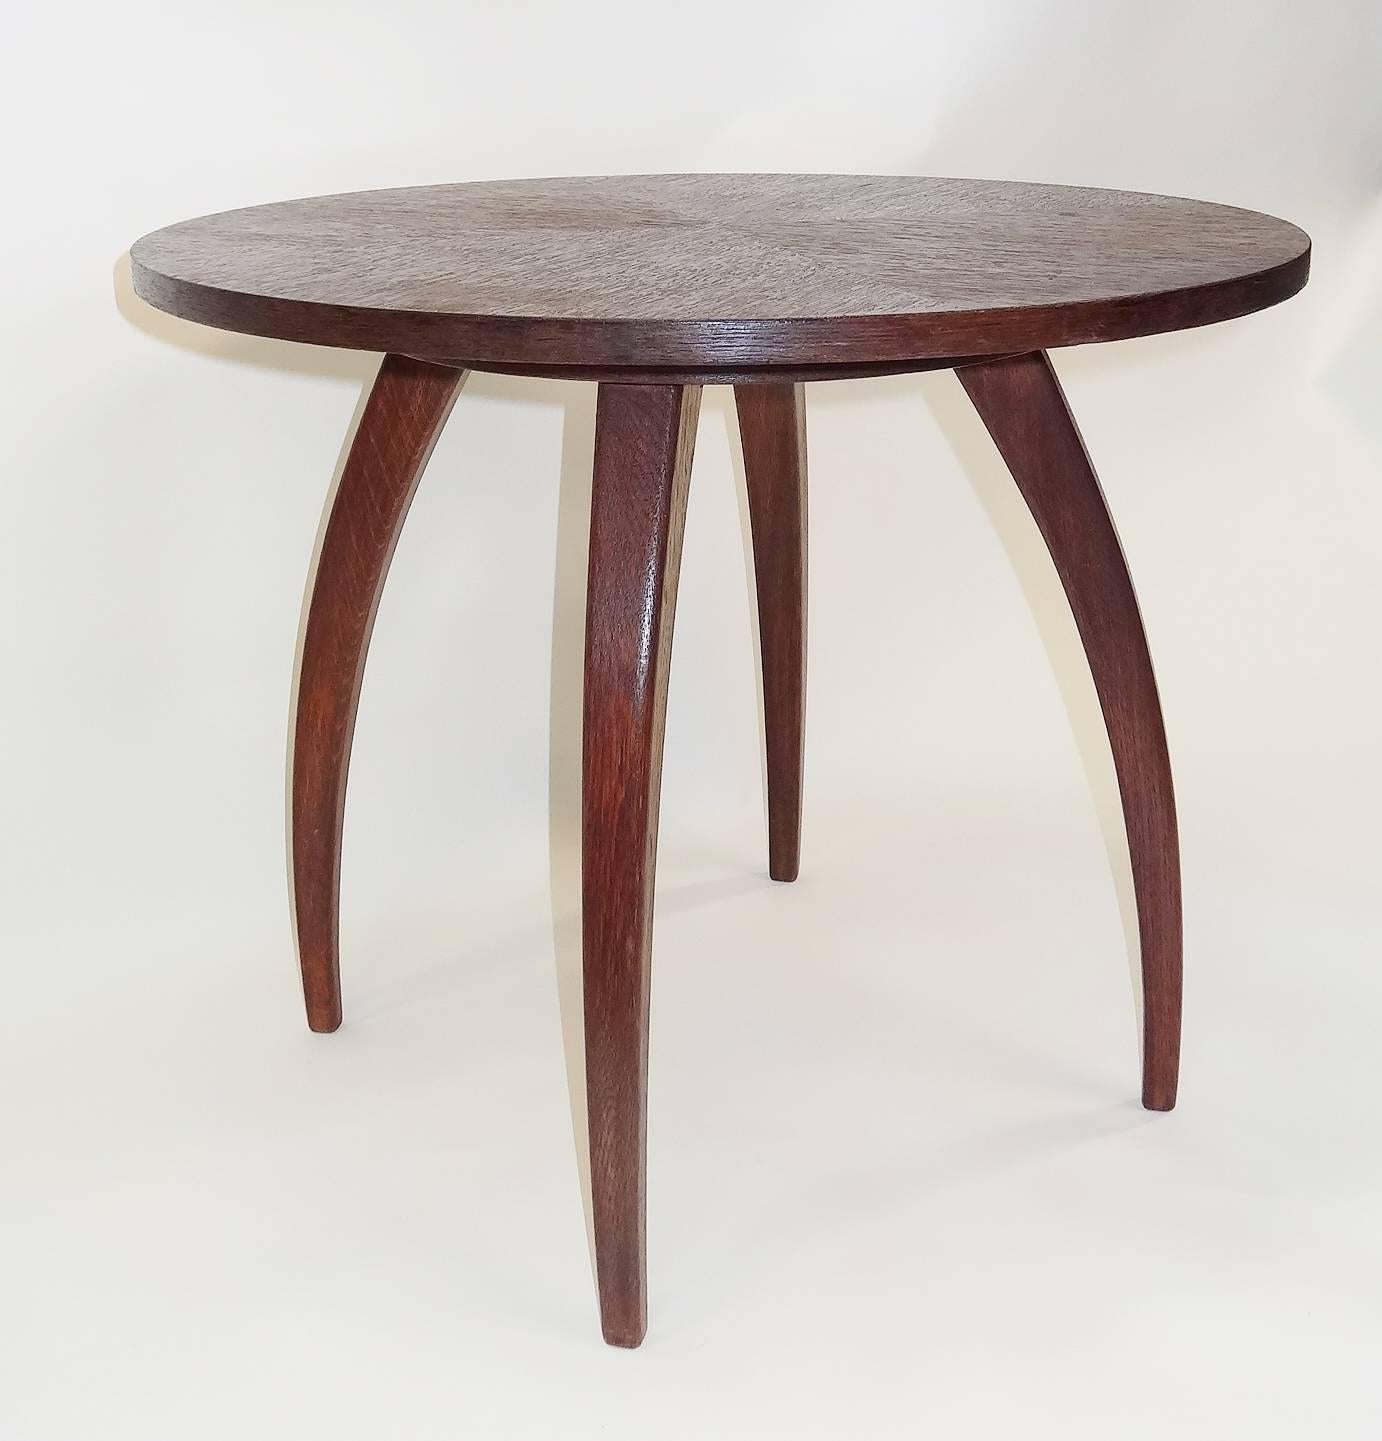 Modernist 1930s Jindrich Halabala Spider Oak Table In Excellent Condition For Sale In London, GB